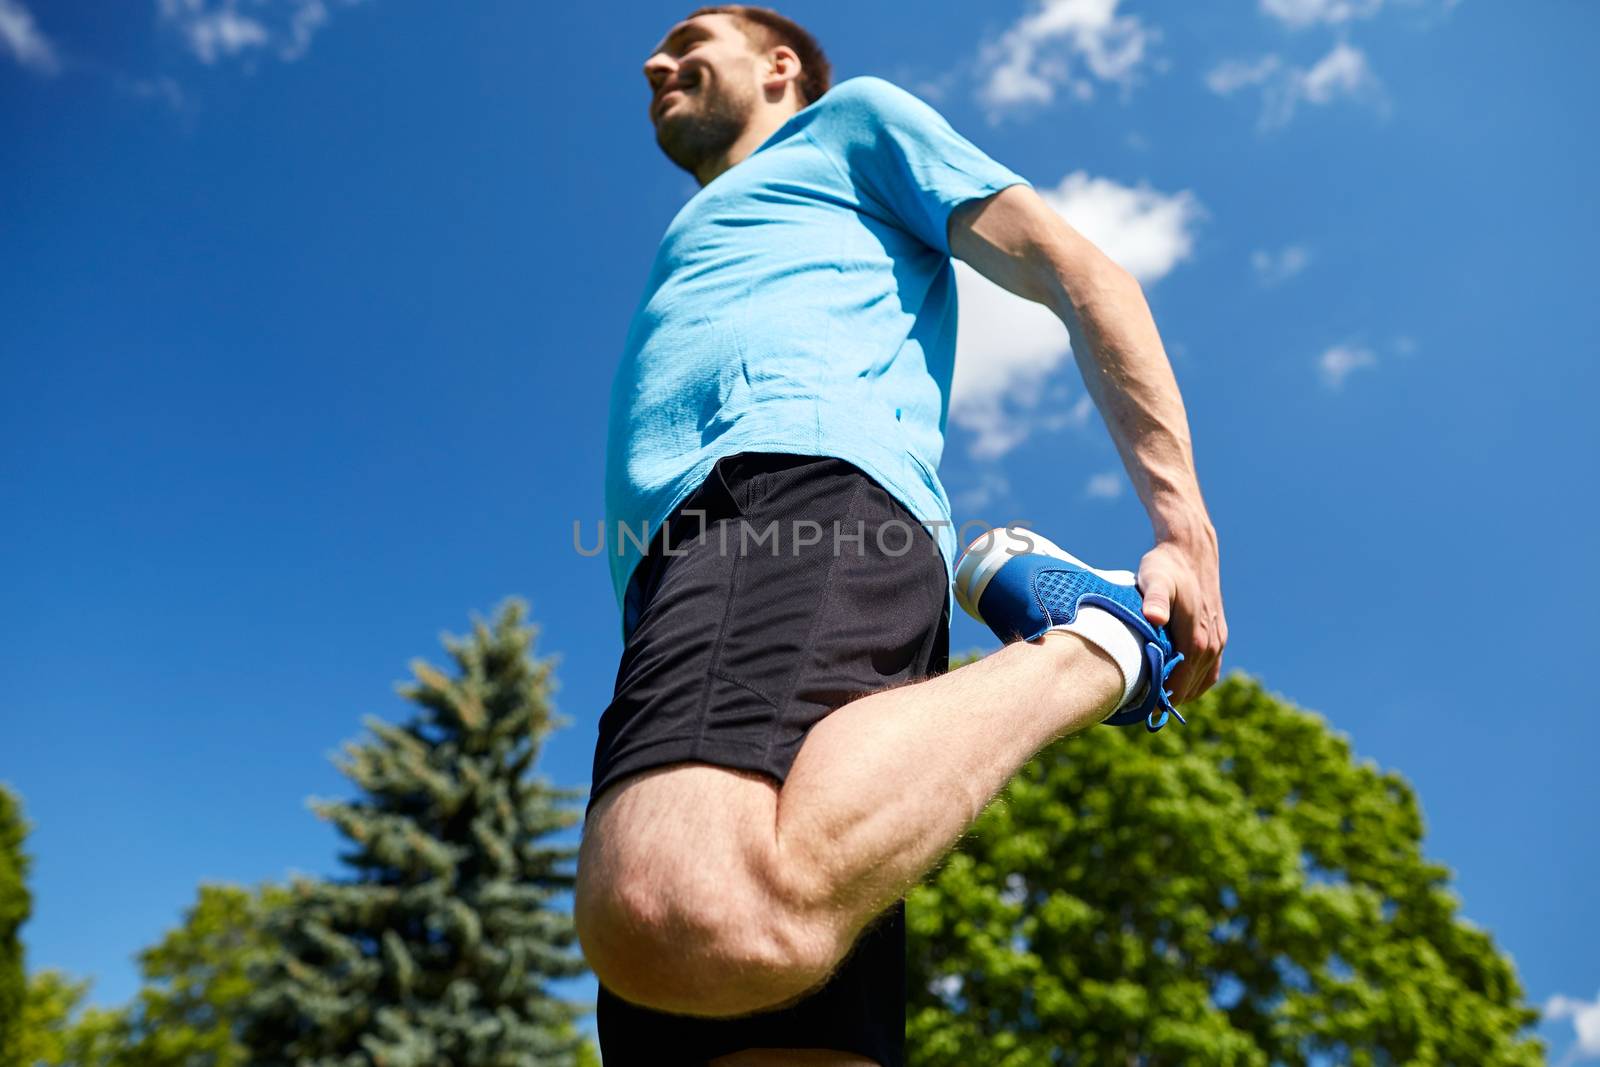 fitness, sport, training, people and lifestyle concept - smiling man stretching leg outdoors